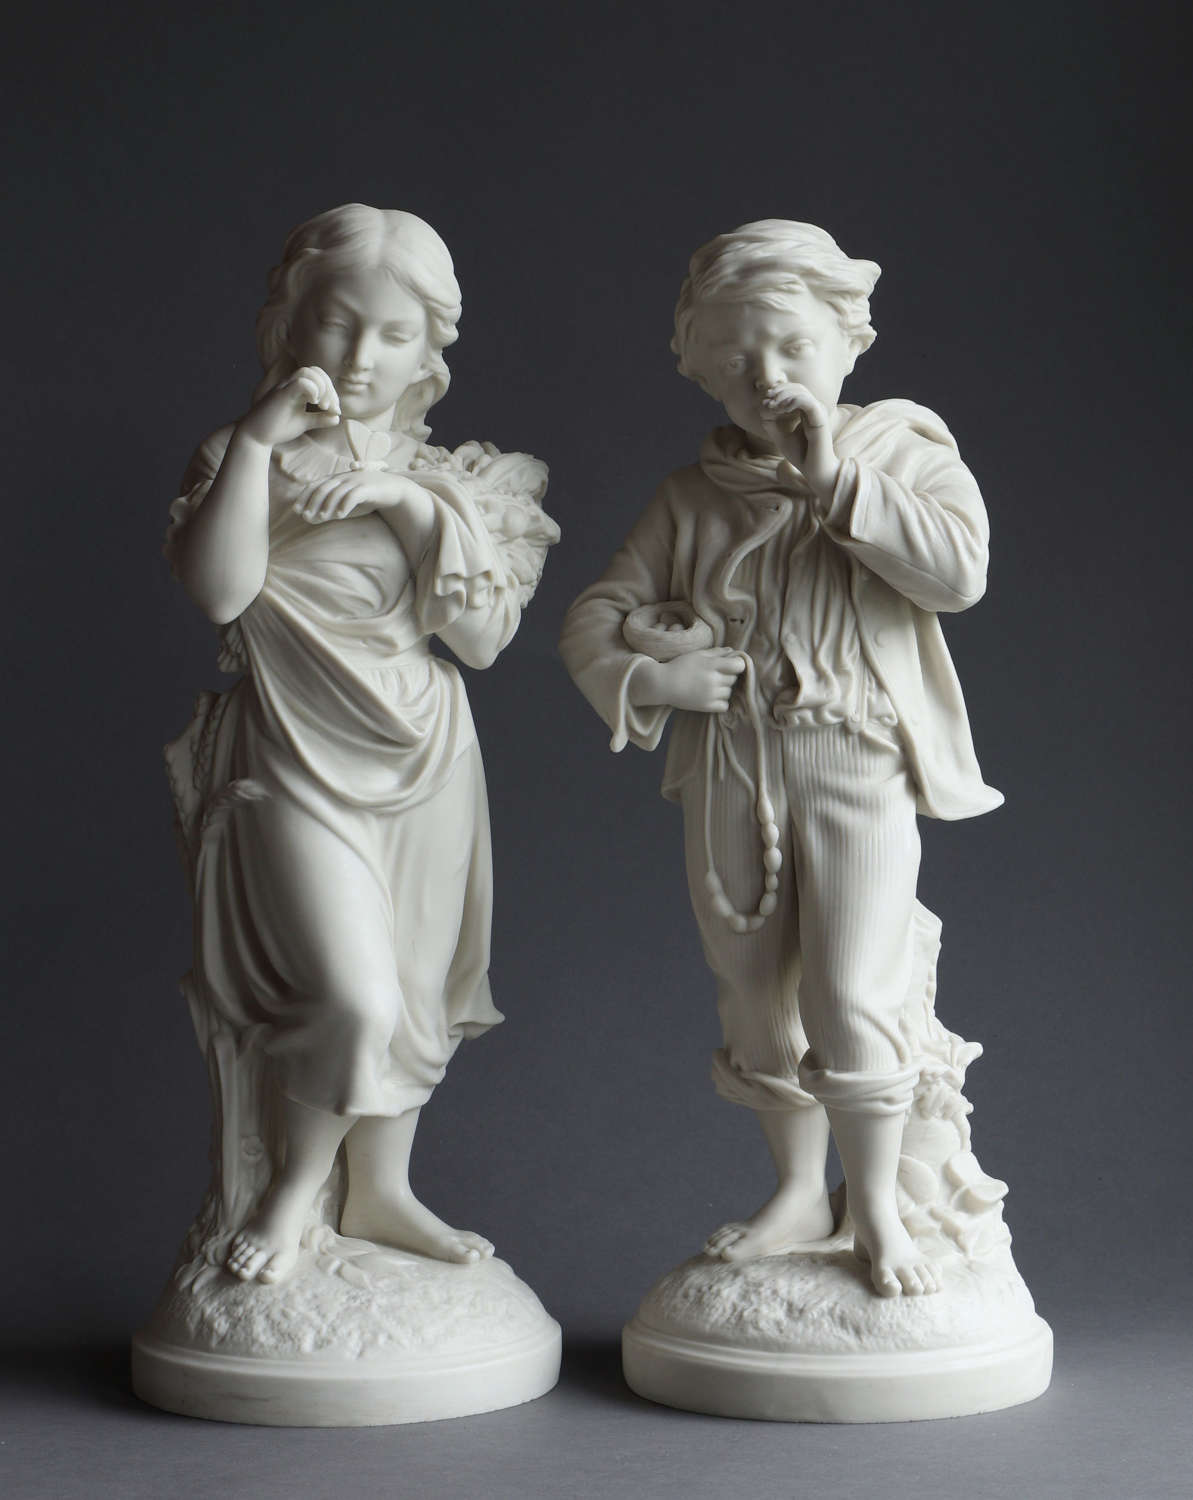 A charming pair of Copeland Parian figures: “Young Naturalists”